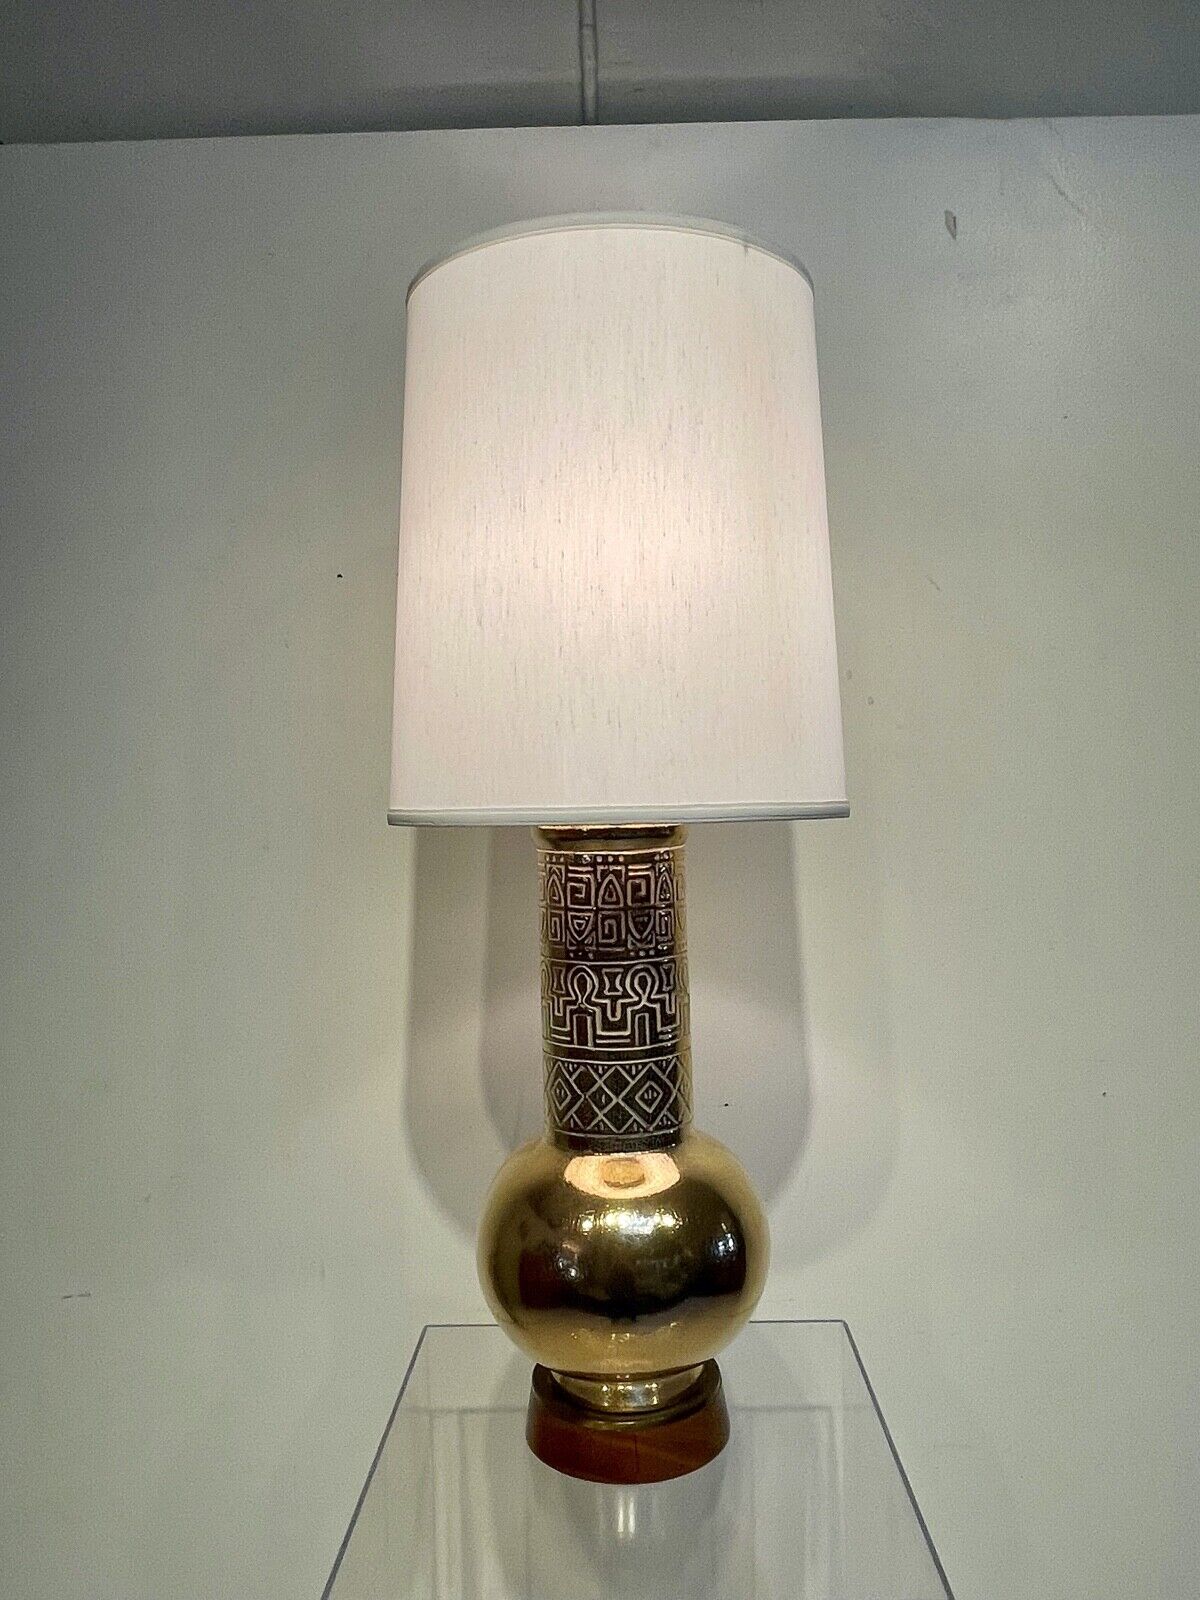 Gilded Hollywood Regency Stiffel Table Lamp with Egyptian Revival Ceramic Heirog